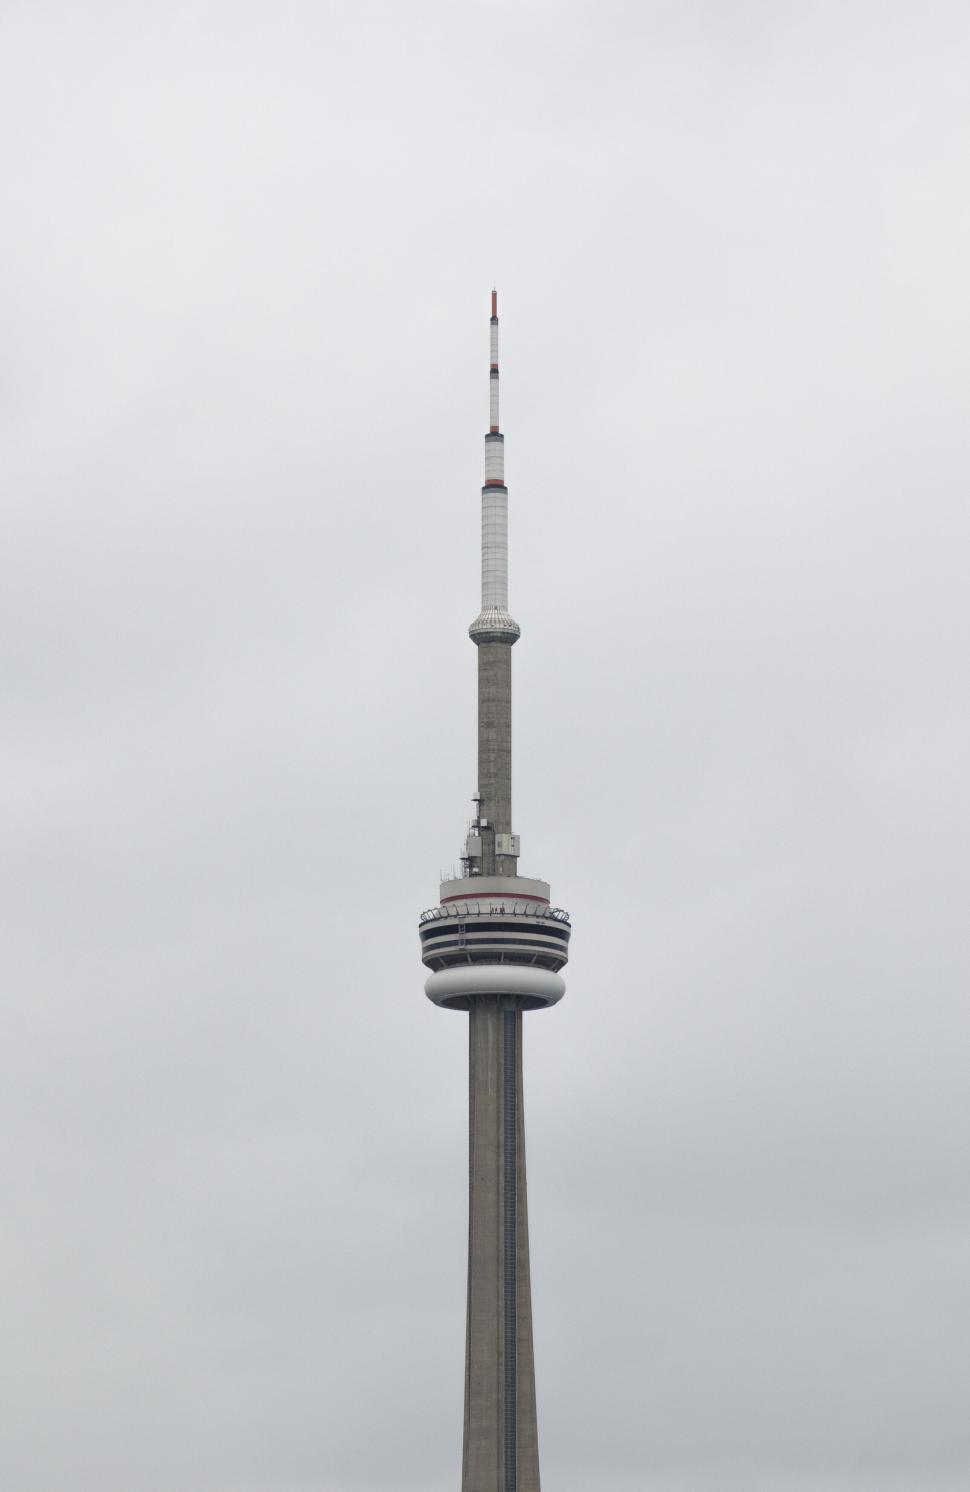 Free Image of Up-close view of the CN Tower 